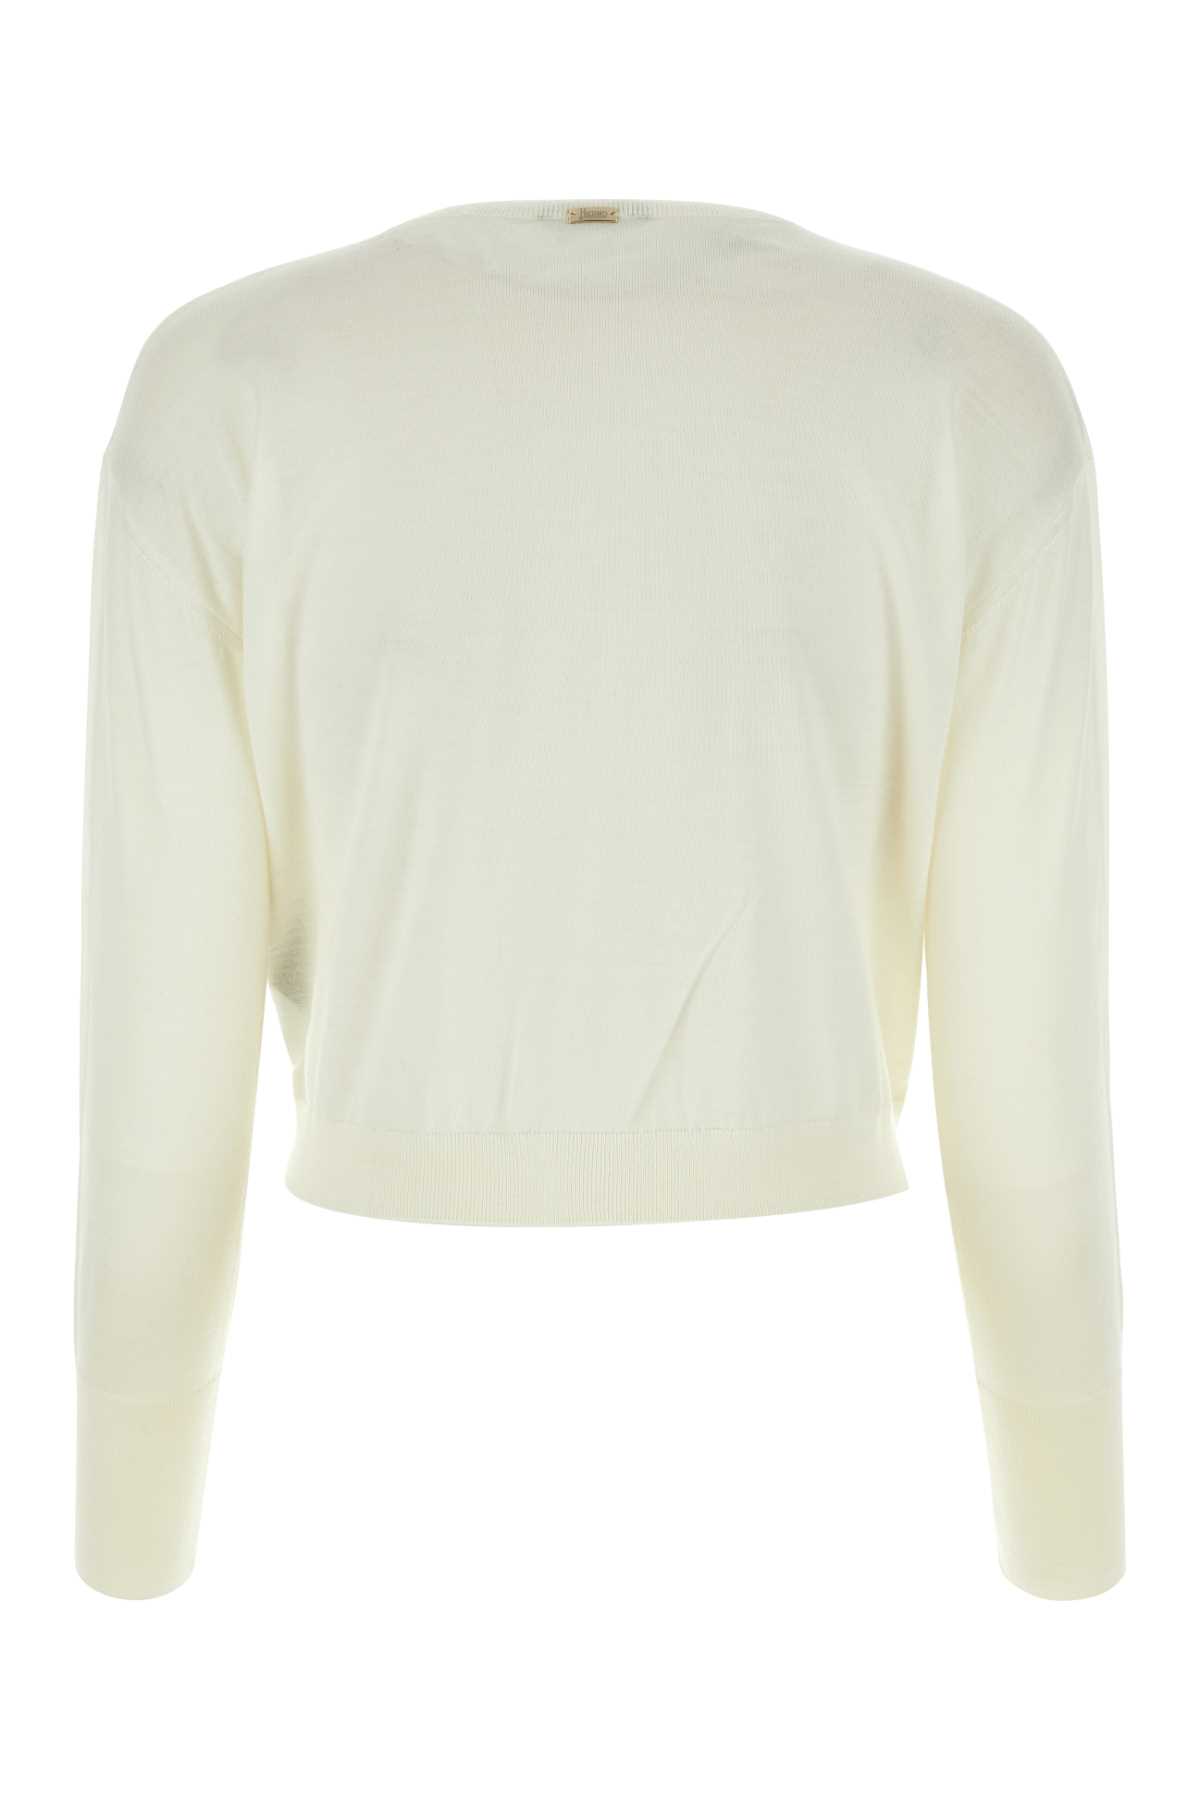 Herno Ivory Wool Jumper In Bianco